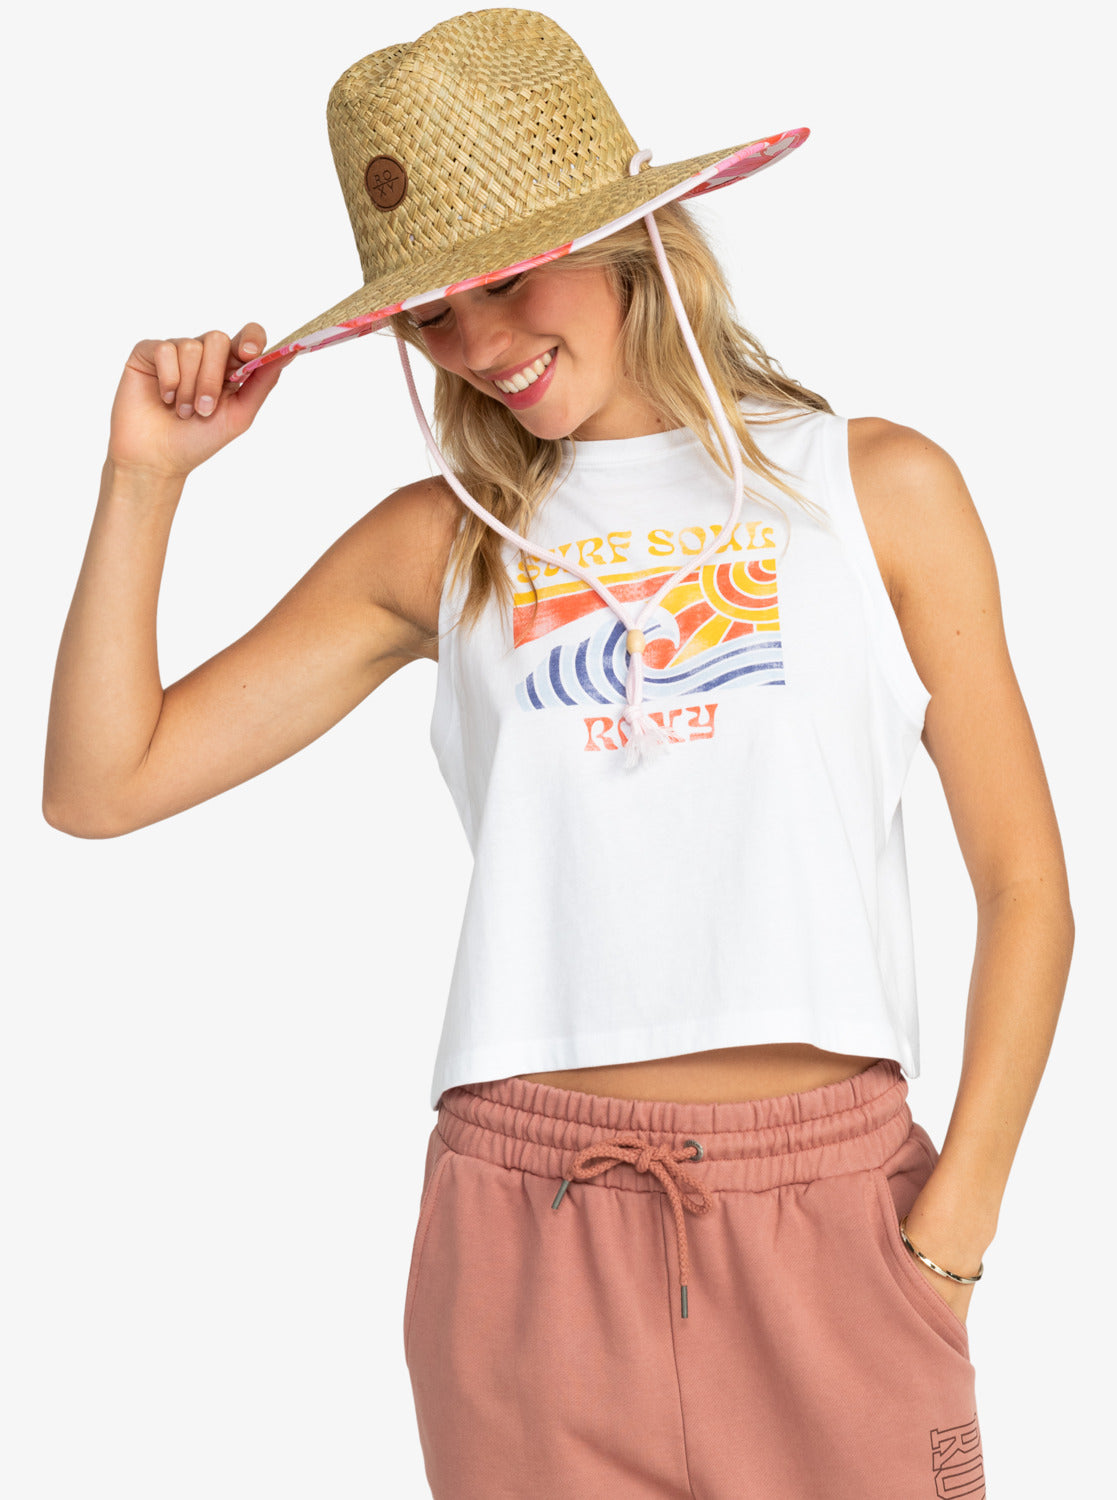 Pina To My Colada Printed Sun Hat - Pale Dogwood Lhibiscus